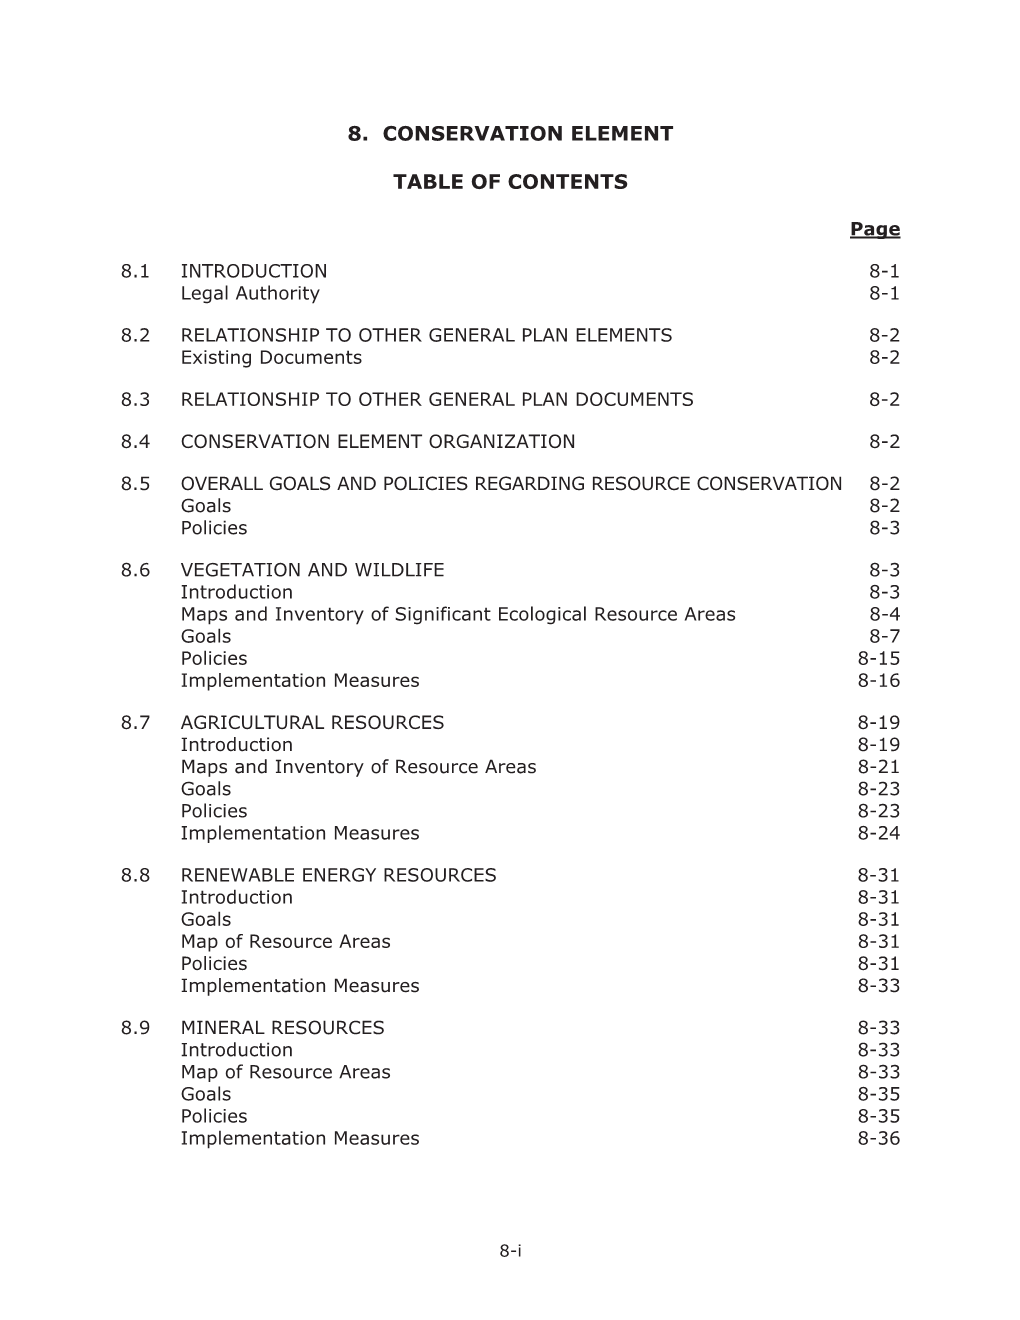 8. Conservation Element Table of Contents